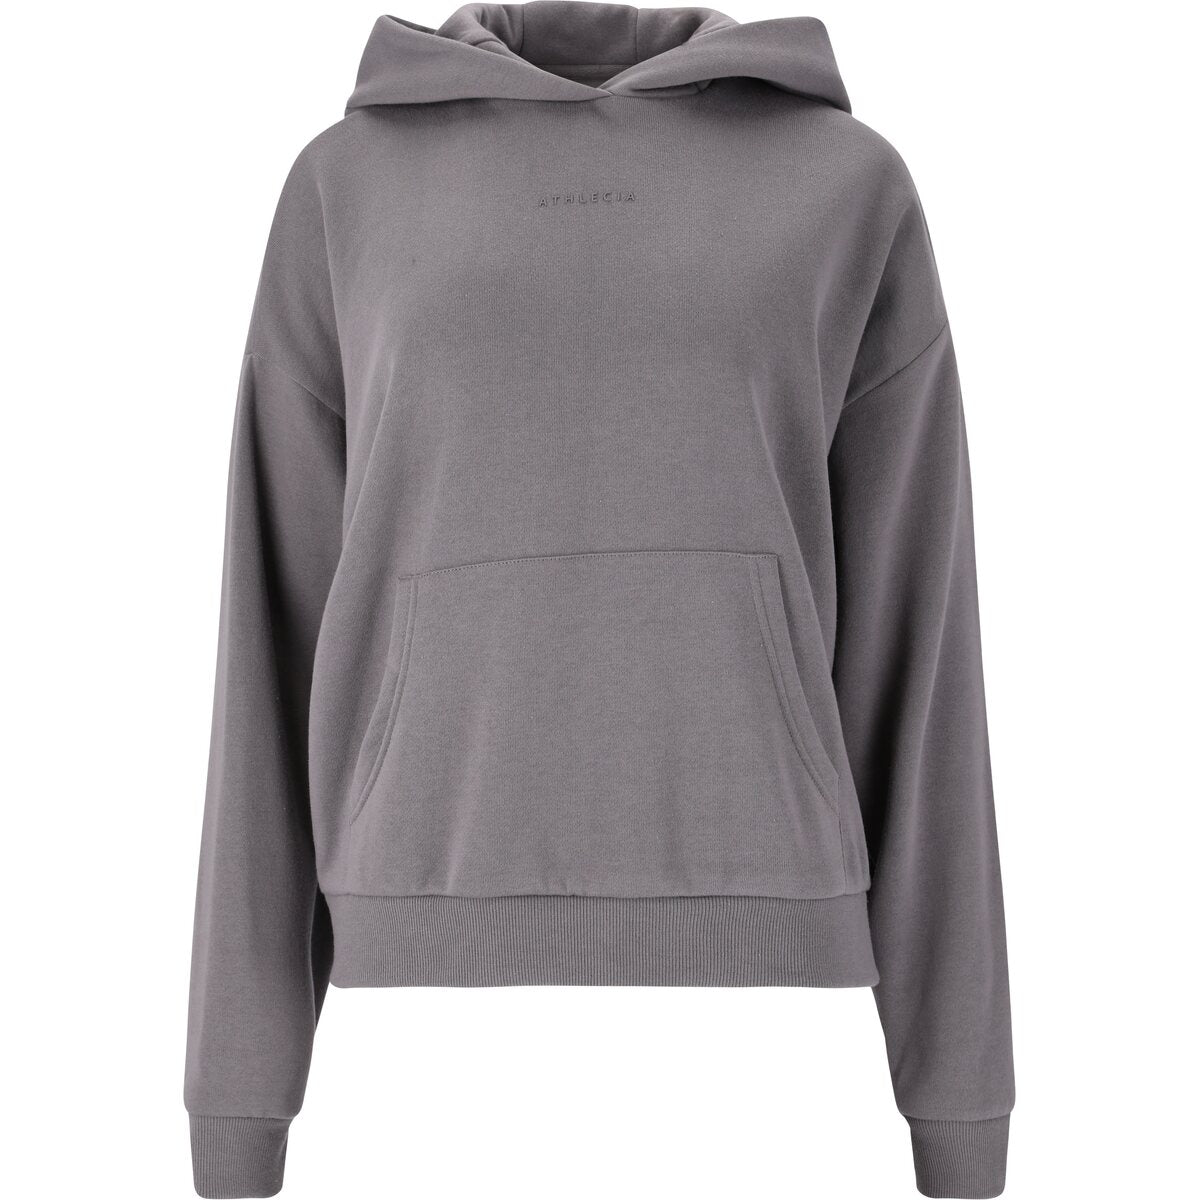 Athlecia Ruthie Womenswear Hoody 5 Shaws Department Stores